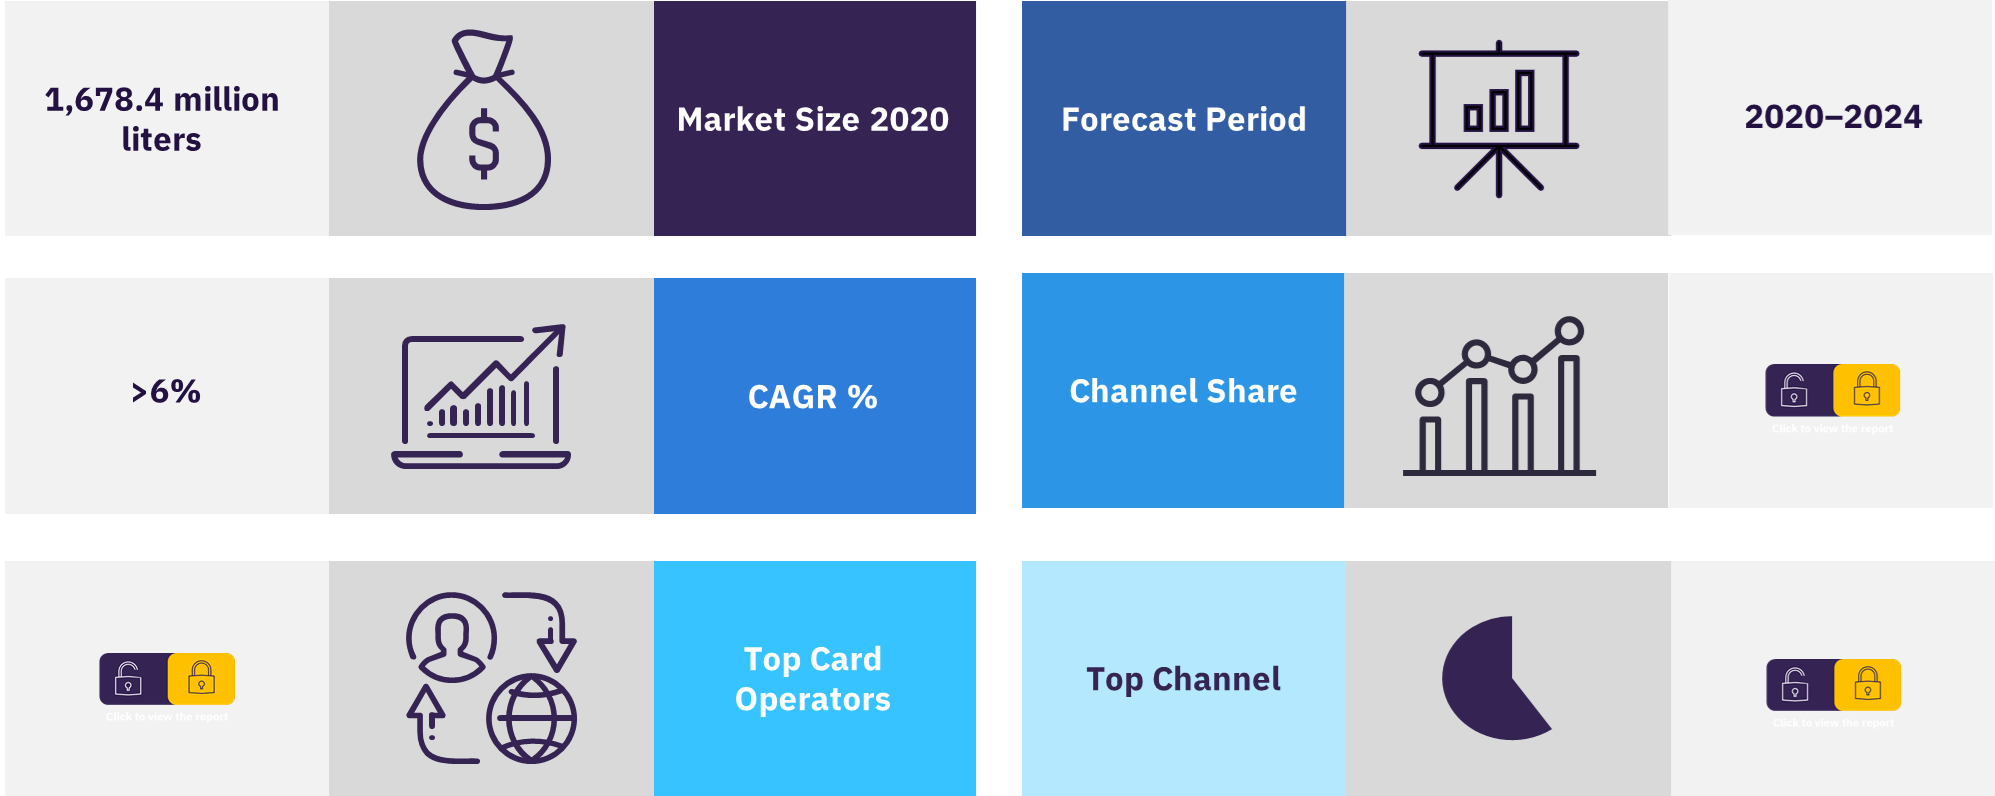 Overview of the Portugal fuel cards market